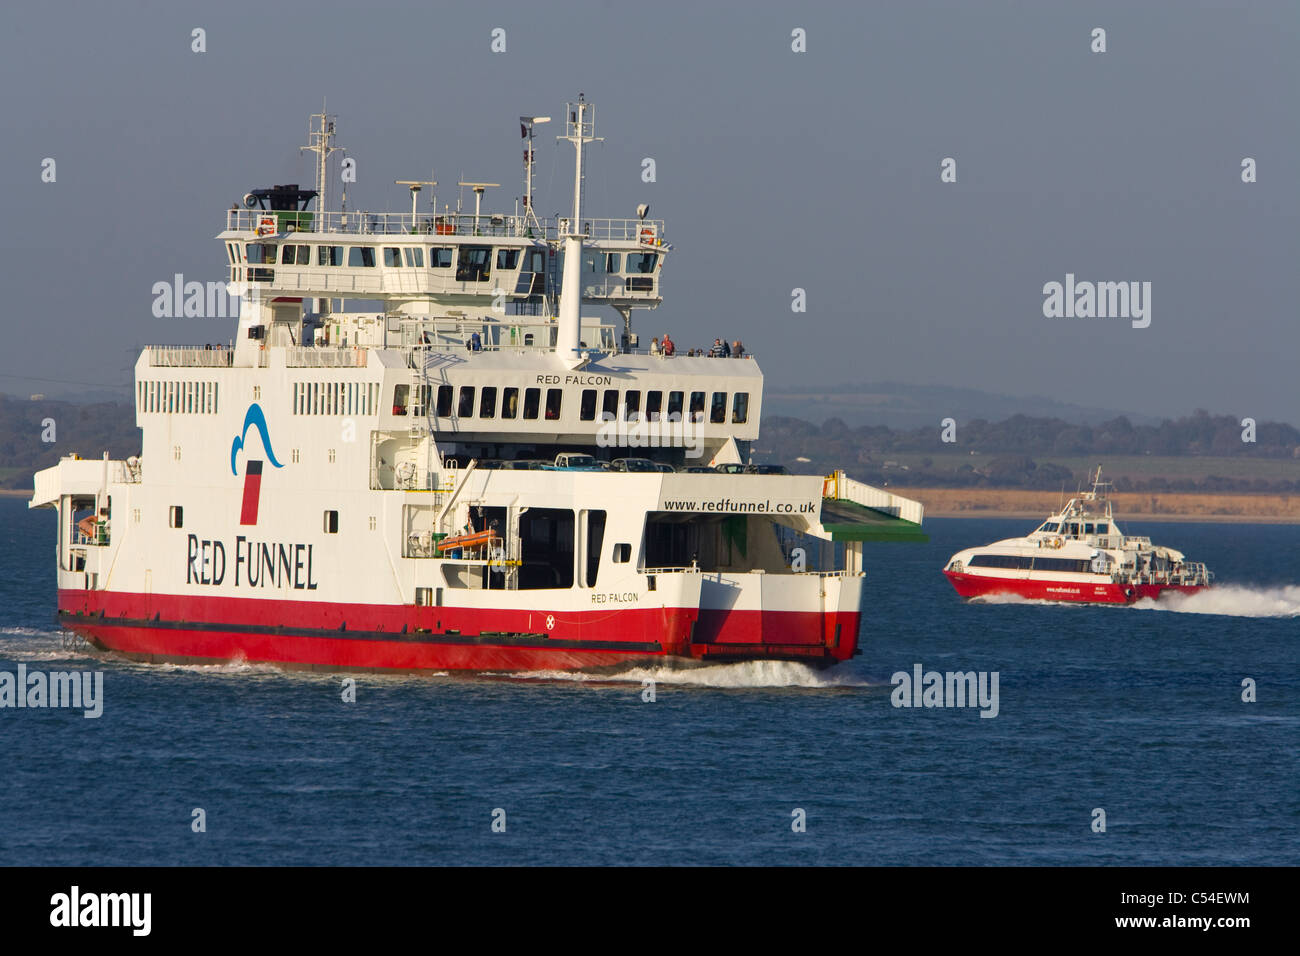 Red Falcon, Red Funnel, Ferry, Red Jet, passenger, Cowes, isle of wight, England, UK, Stock Photo